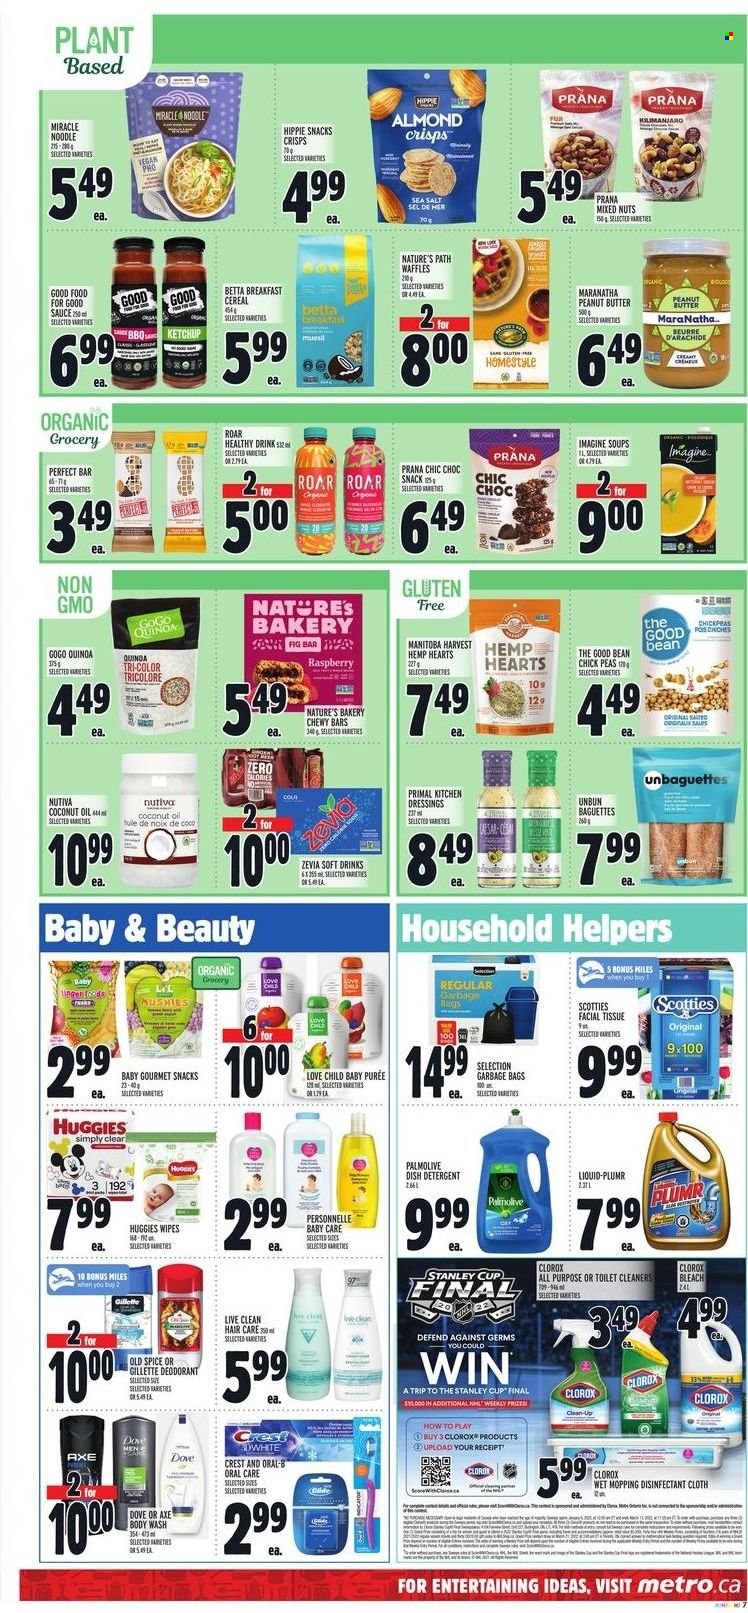 thumbnail - Metro Flyer - January 20, 2022 - January 26, 2022 - Sales products - waffles, peas, sauce, noodles, snack, sea salt, cereals, spice, oil, peanut butter, mixed nuts, soft drink, wipes, tissues, bleach, Clorox, body wash, Palmolive, Crest, anti-perspirant, bag, cup, Primal, baguette, detergent, Dove, Gillette, Huggies, ketchup, Old Spice, Oral-B, deodorant. Page 10.